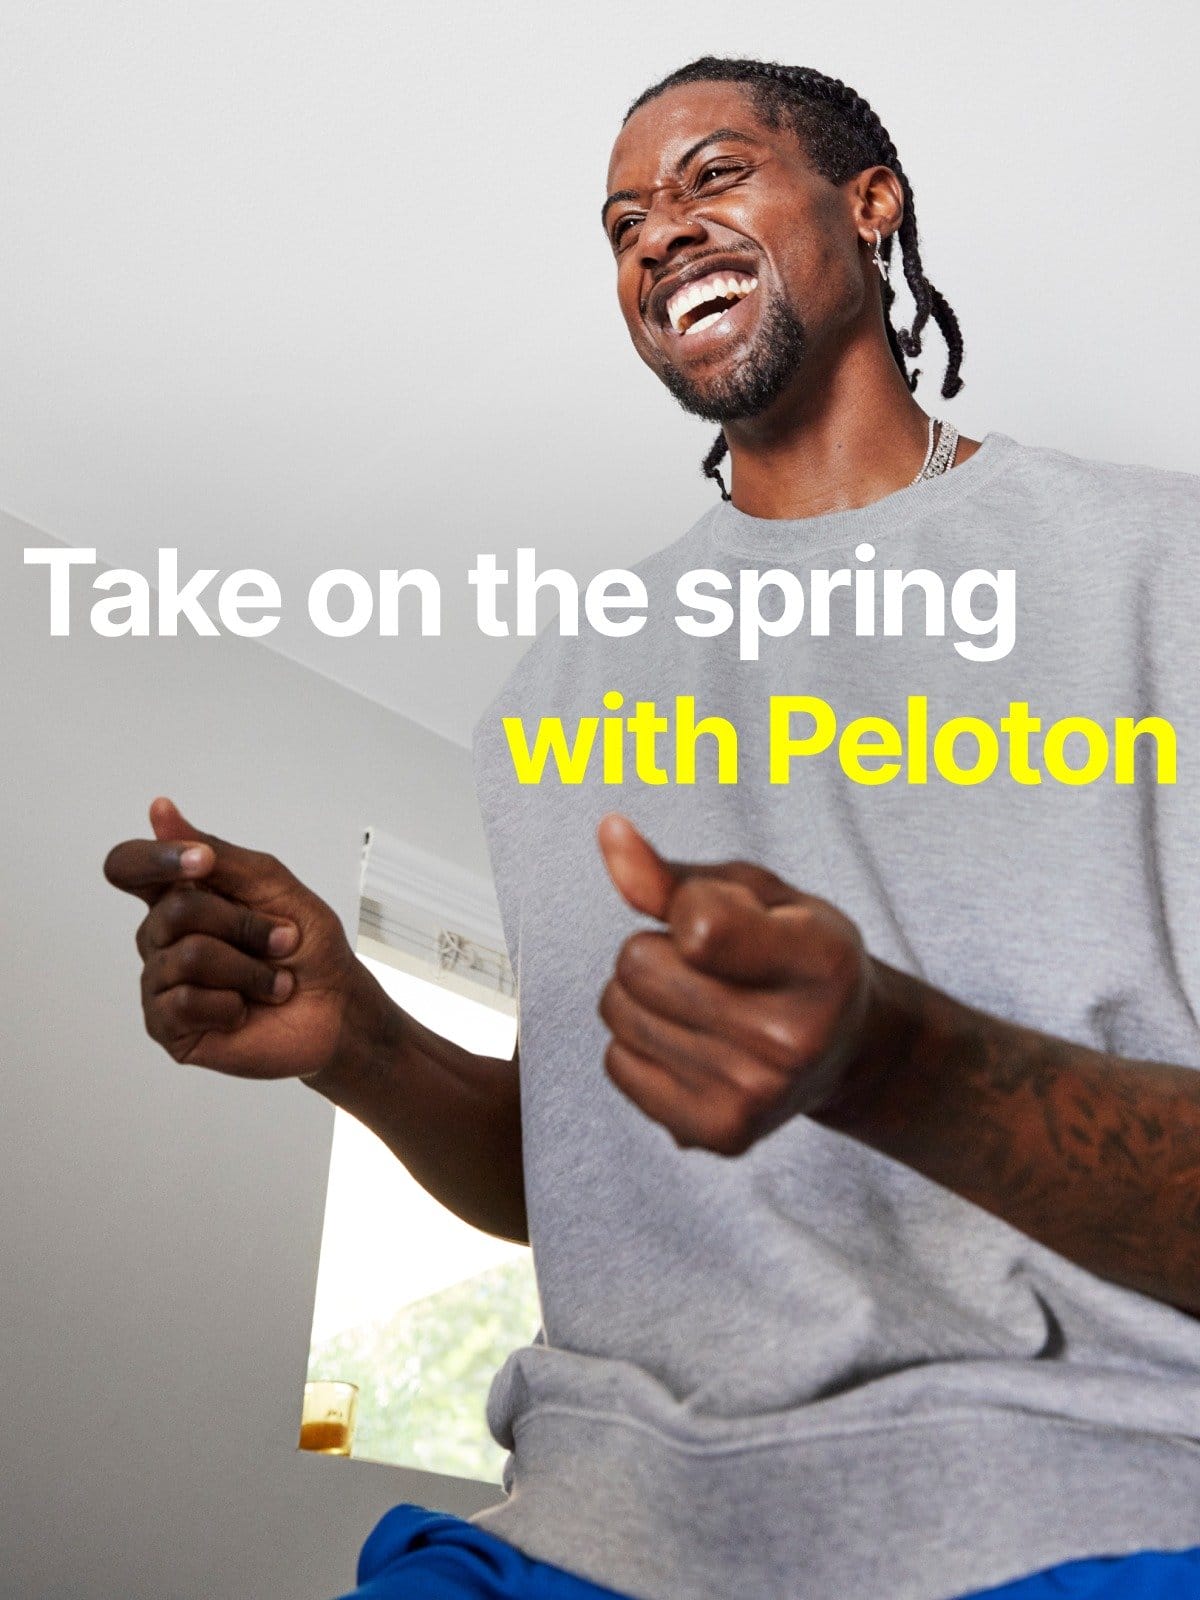 Take on the spring with Peloton